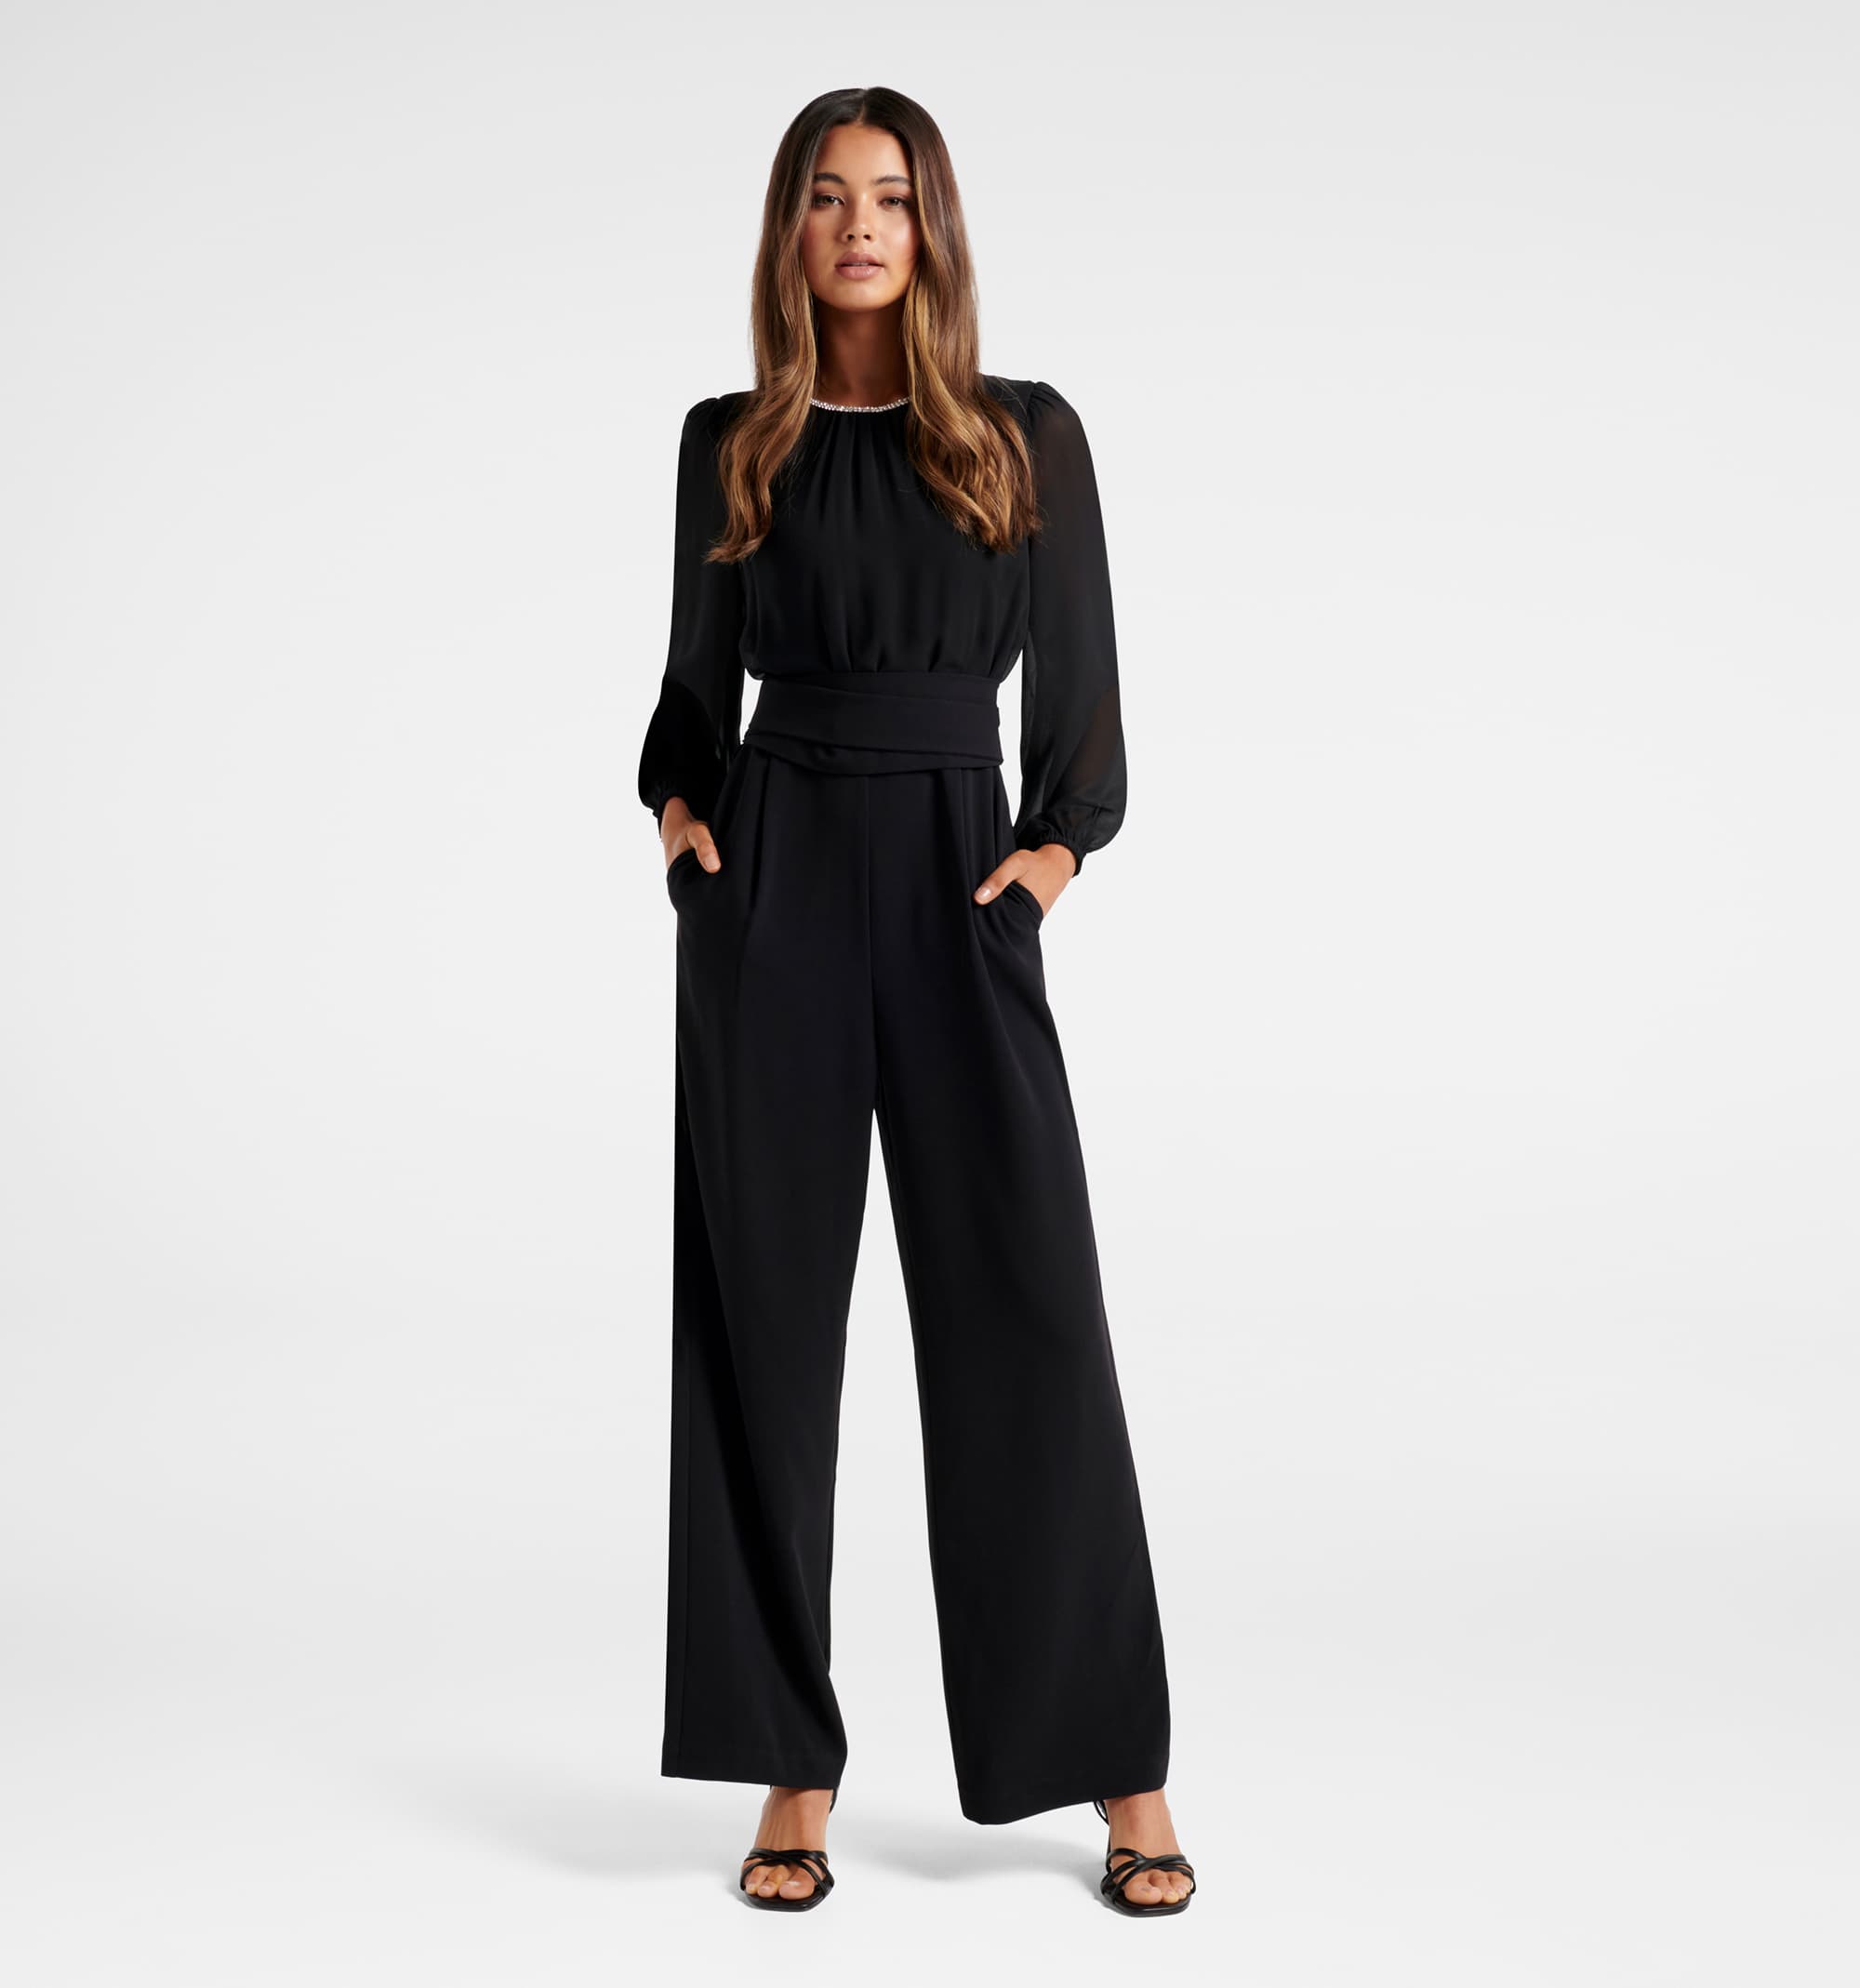 Forever New Navy Blue Solid Basic Jumpsuit 8898971.htm - Buy Forever New  Navy Blue Solid Basic Jumpsuit 8898971.htm online in India